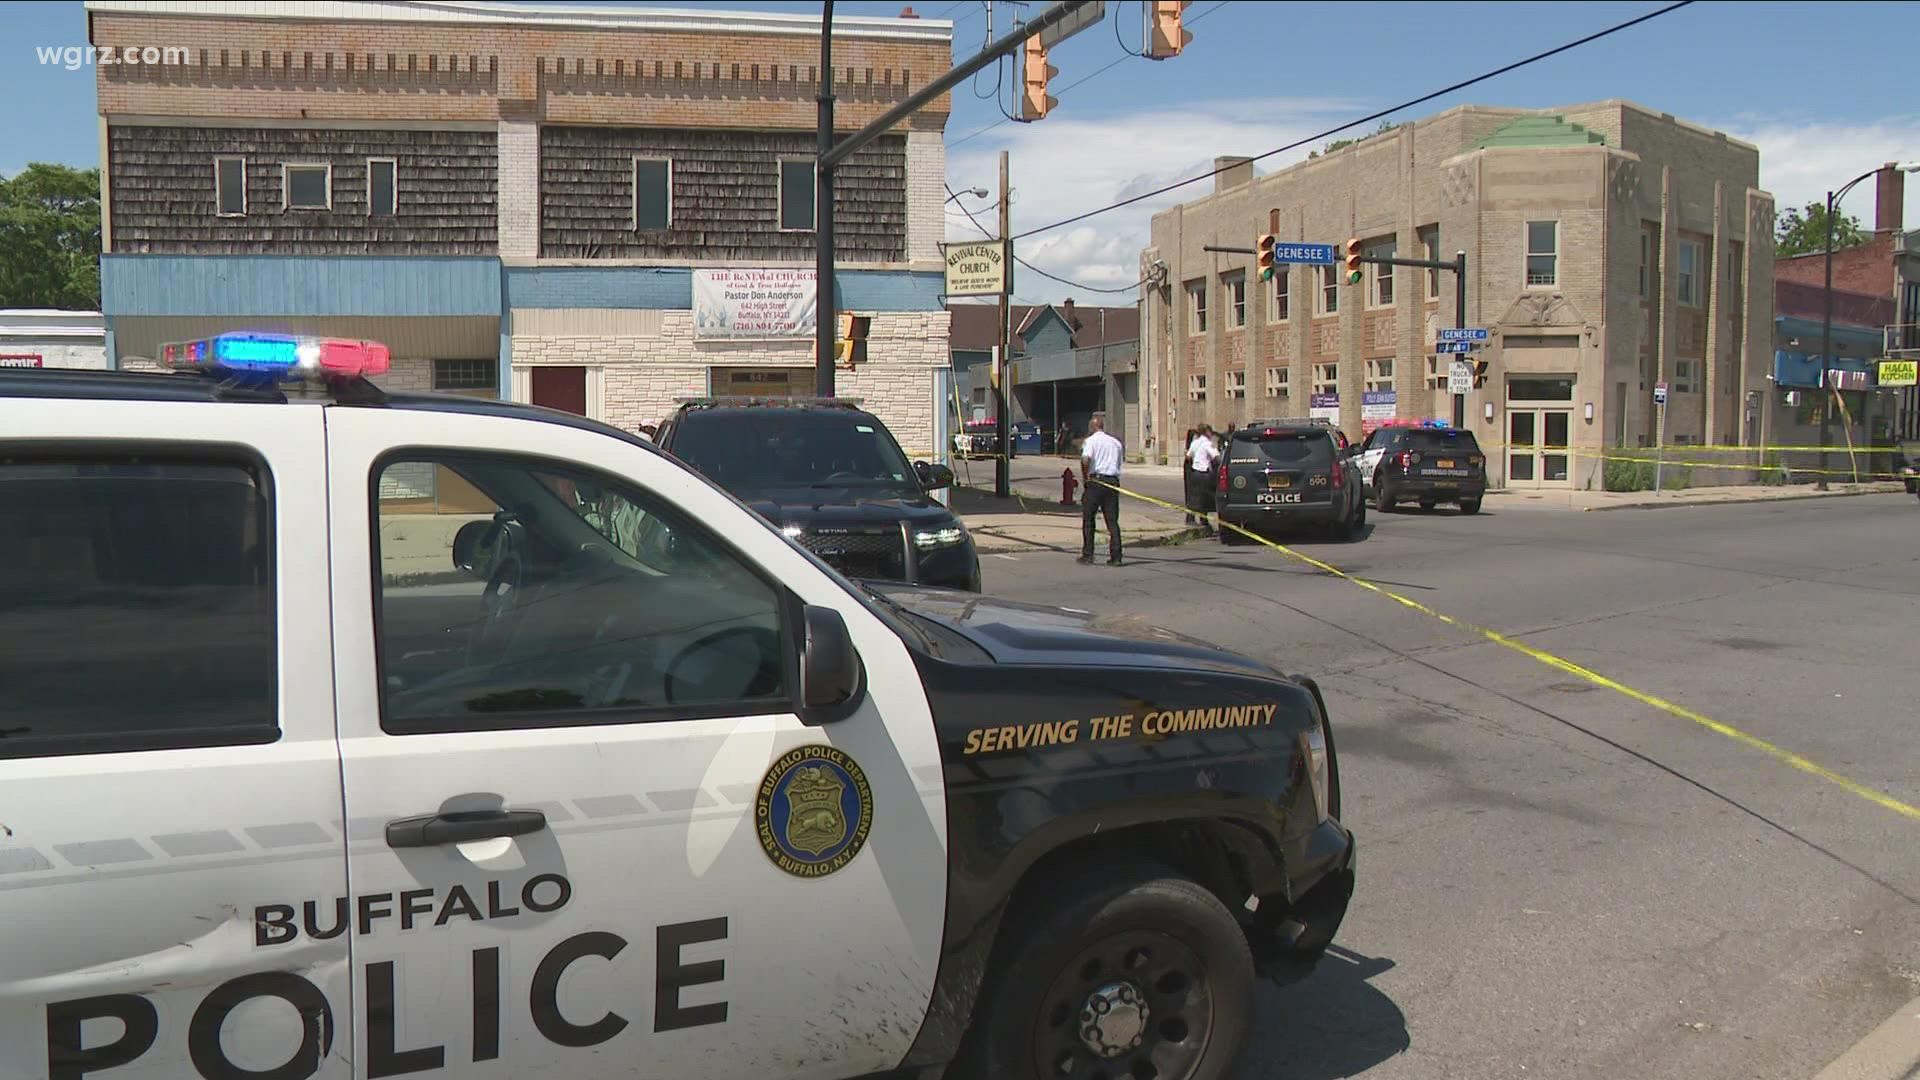 The man was shot around 2:30 p.m. while inside a vehicle near Genesee Street and Herman Street, according to Buffalo Police.